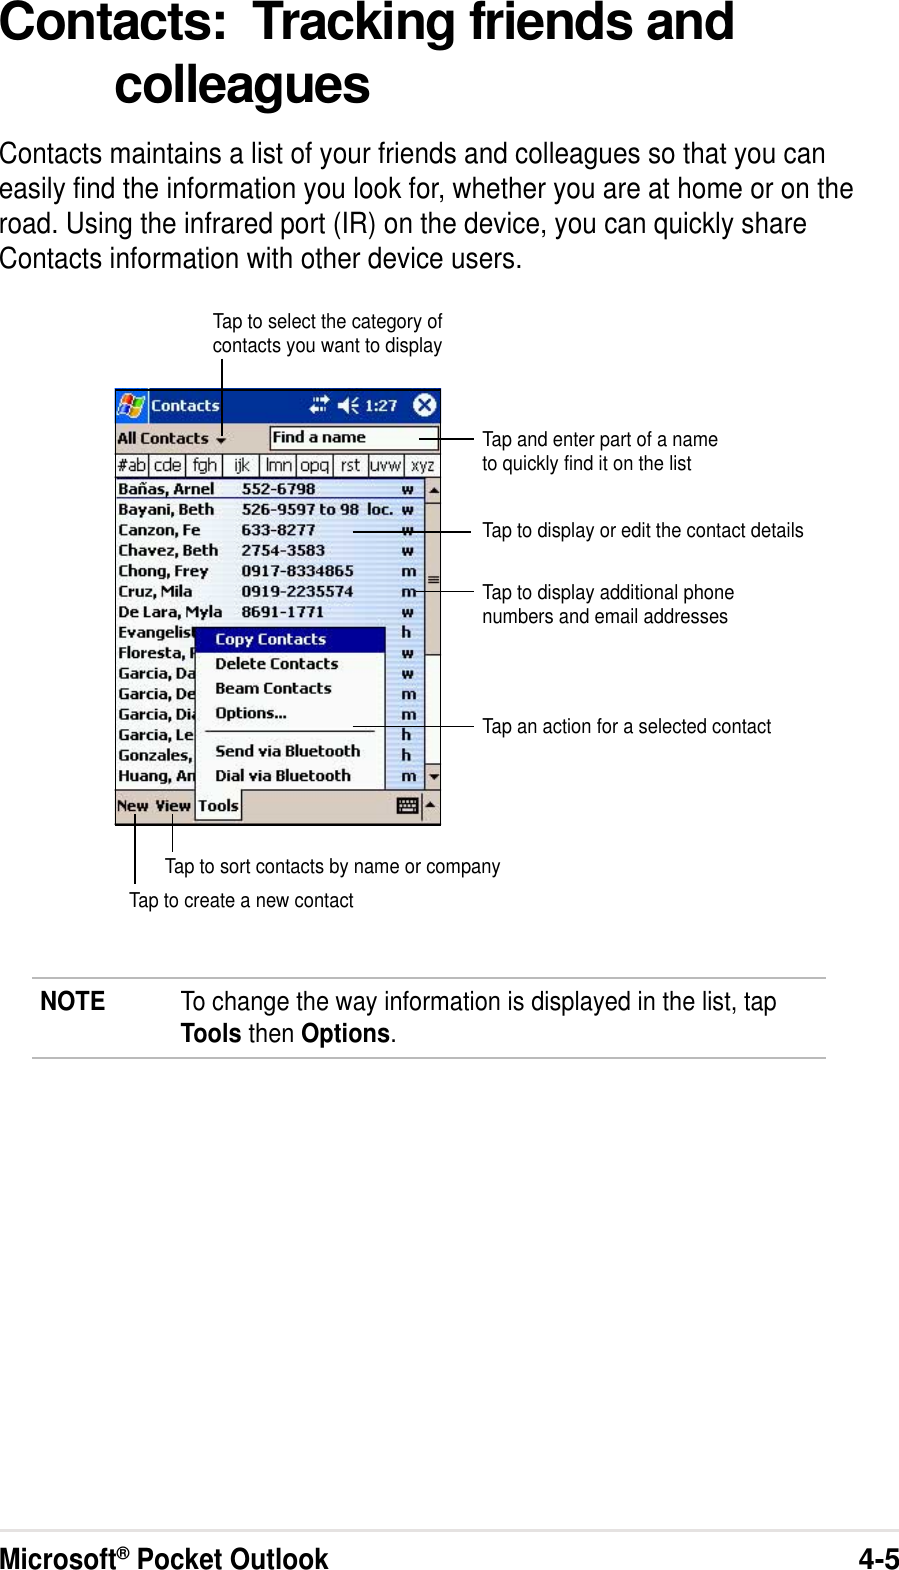 Microsoft® Pocket Outlook4-5Contacts:  Tracking friends andcolleaguesContacts maintains a list of your friends and colleagues so that you caneasily find the information you look for, whether you are at home or on theroad. Using the infrared port (IR) on the device, you can quickly shareContacts information with other device users.NOTE To change the way information is displayed in the list, tapTools then Options.Tap and enter part of a nameto quickly find it on the listTap to select the category ofcontacts you want to displayTap to display additional phonenumbers and email addressesTap to display or edit the contact detailsTap to create a new contactTap to sort contacts by name or companyTap an action for a selected contact